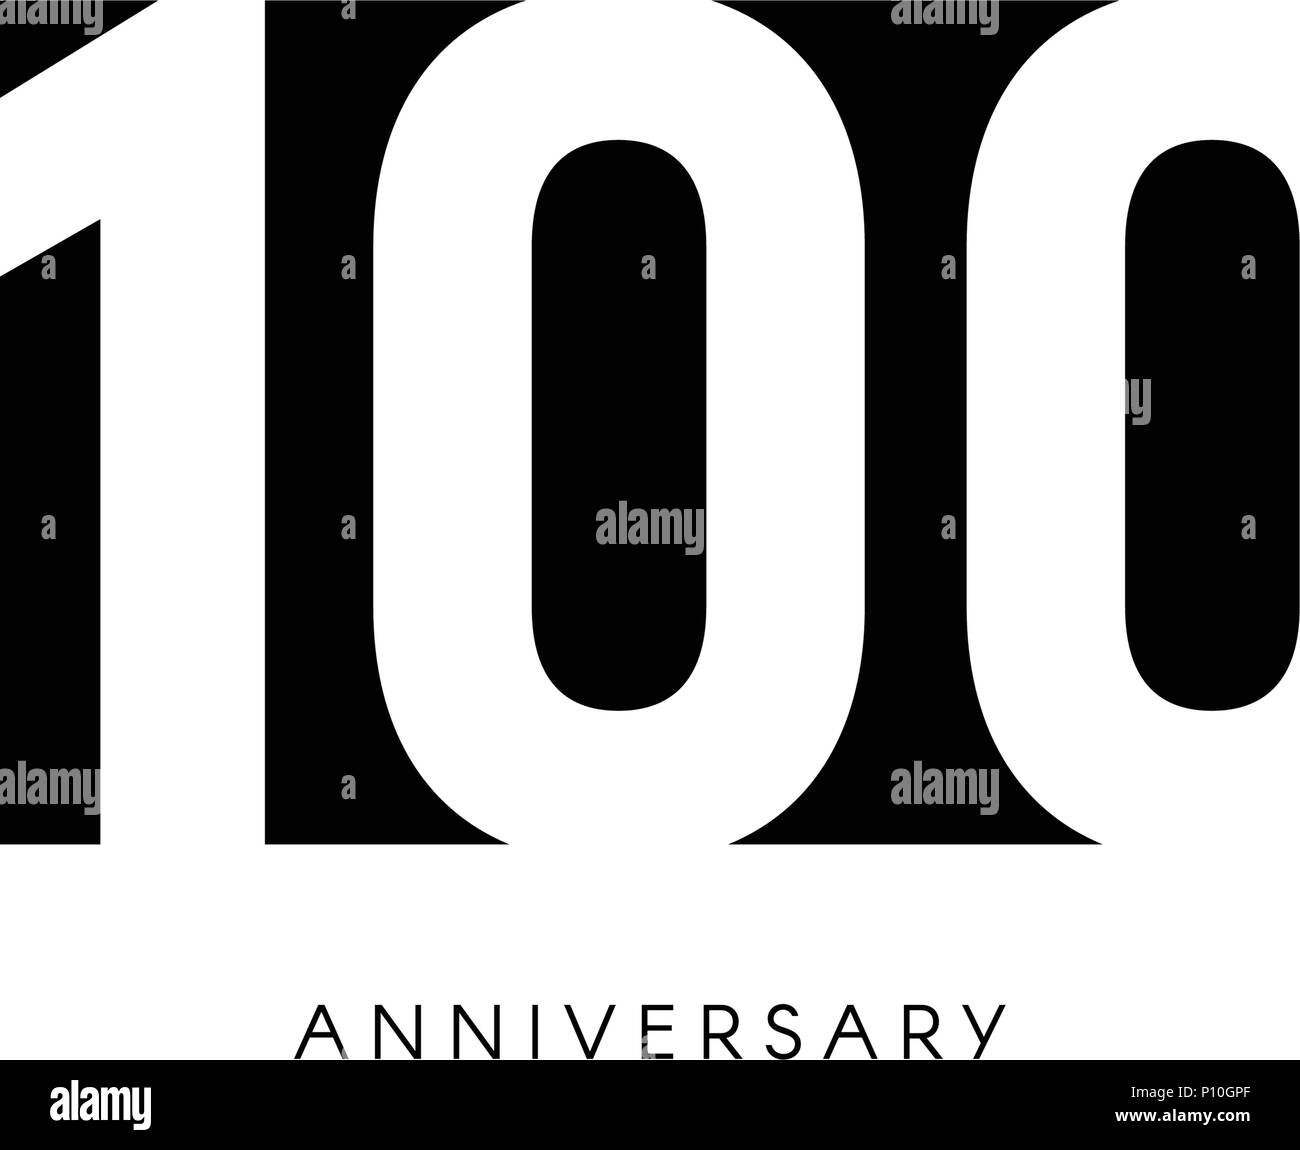 One hundred anniversary, minimalistic logo. One hundredth years, 100th jubilee, greeting card. Birthday invitation. 100 year sign. Black negative space vector illustration on white background. Stock Vector